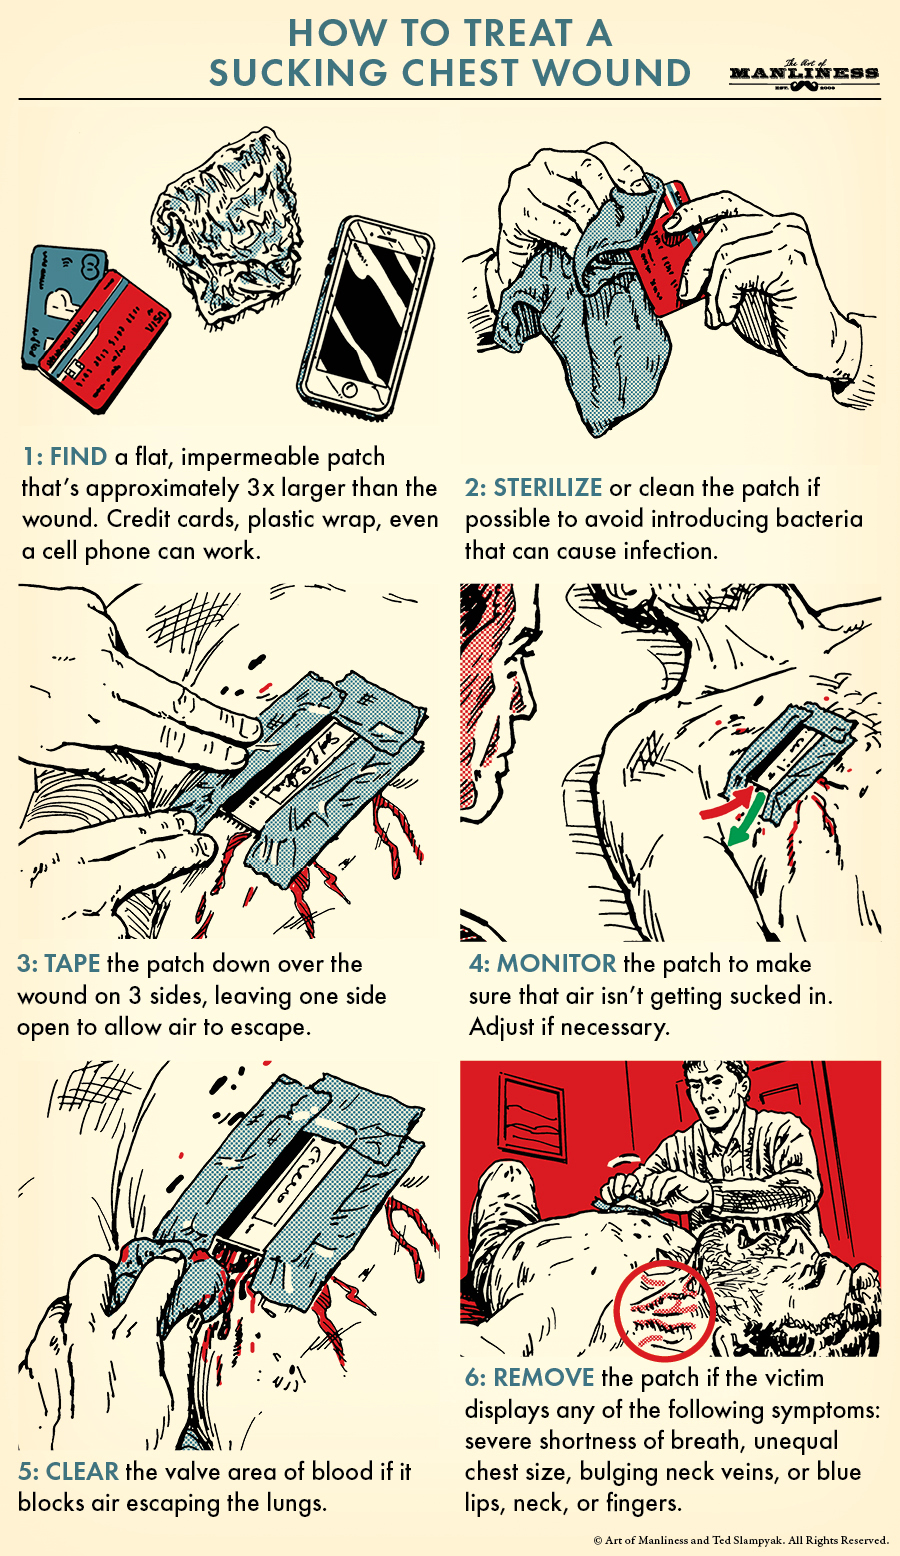 Six basic steps to treat a sucking chest wound. 